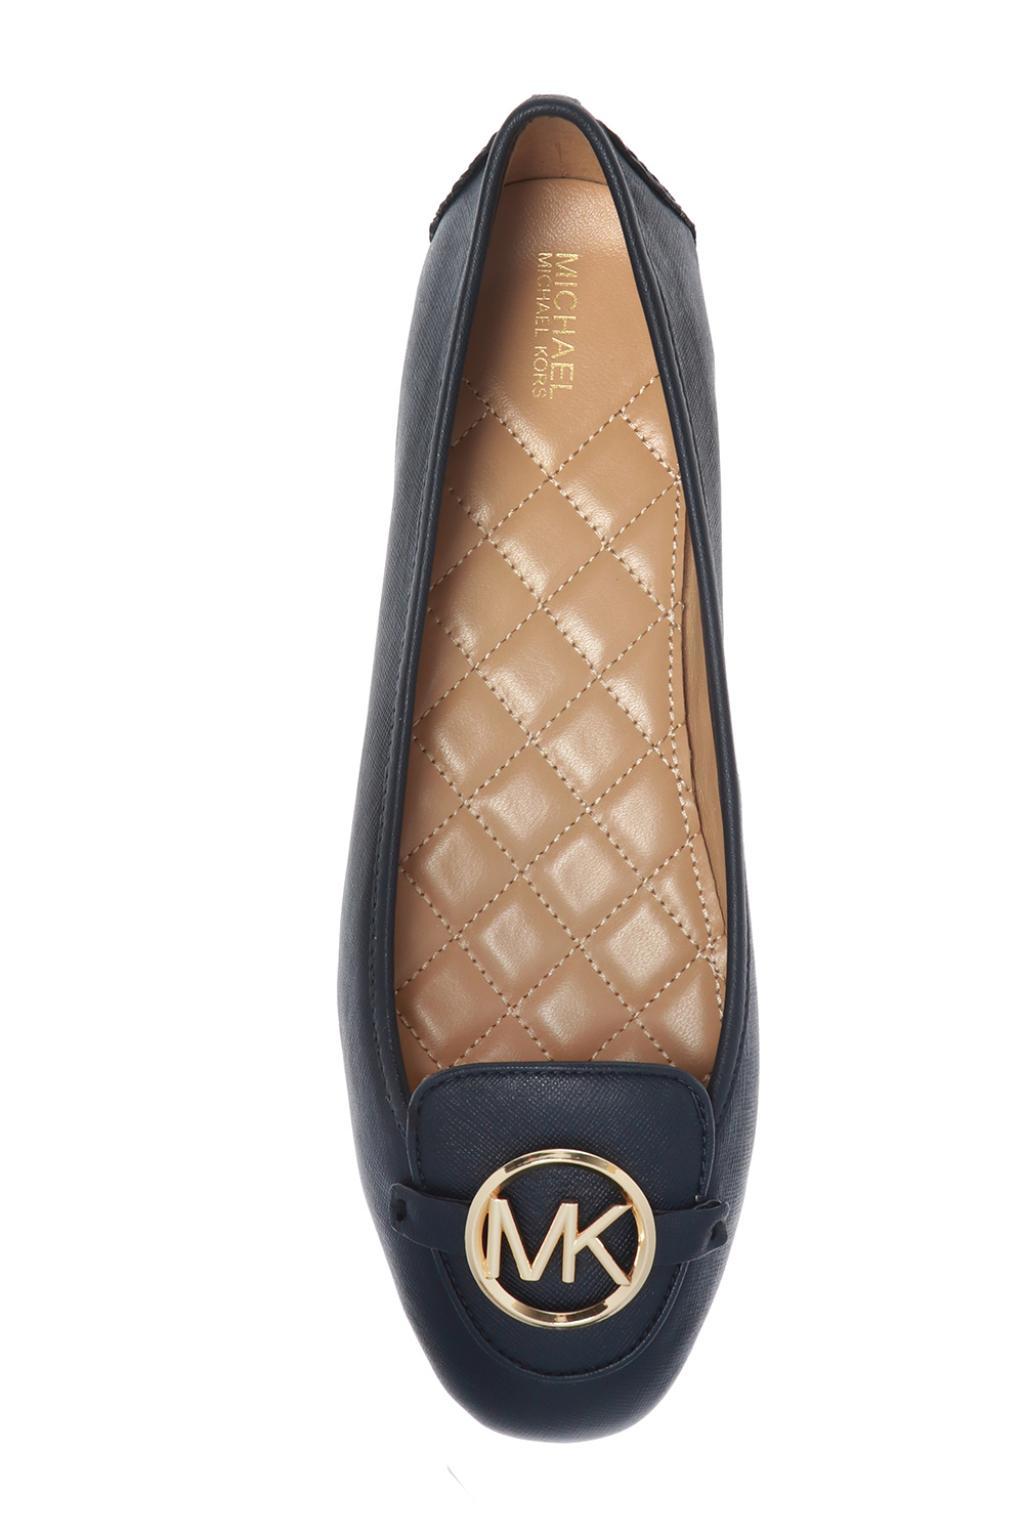 Michael Kors Leather 'lillie' Ballet Flats in Navy Blue (Blue) - Lyst